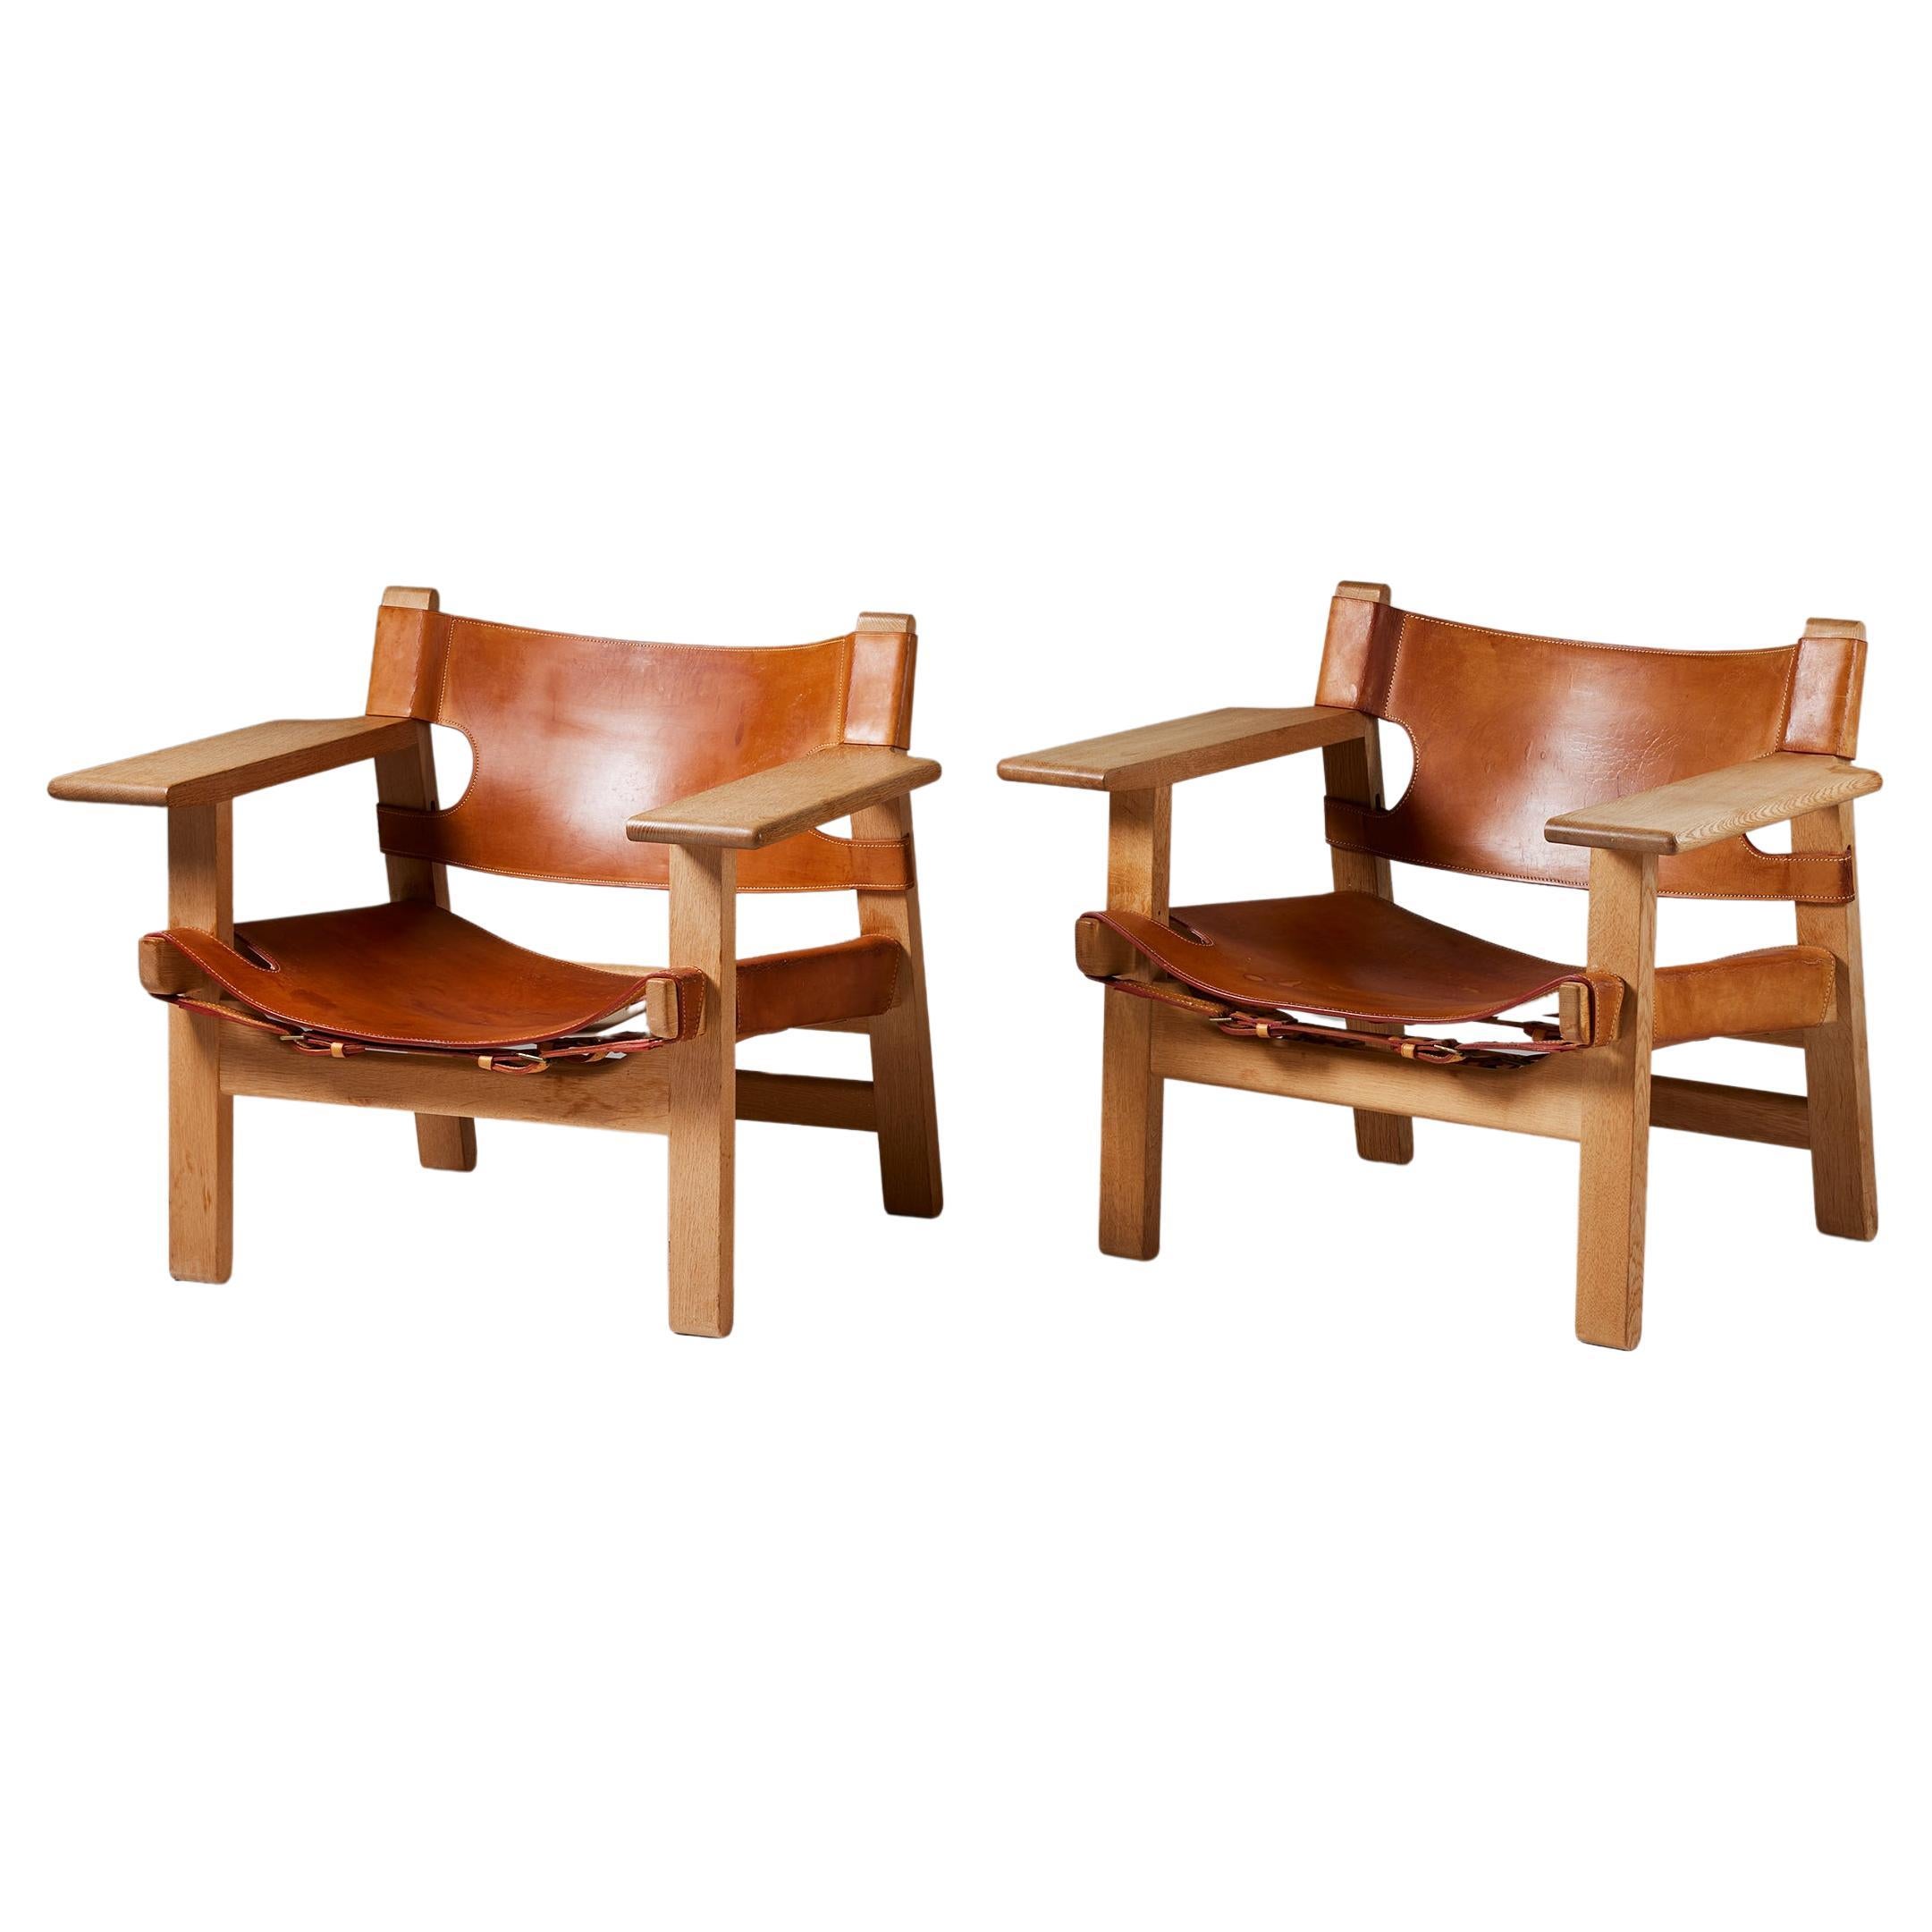 Pair of armchairs ‘The Spanish Chair’ model 2226 designed by Börge Mogensen Oak